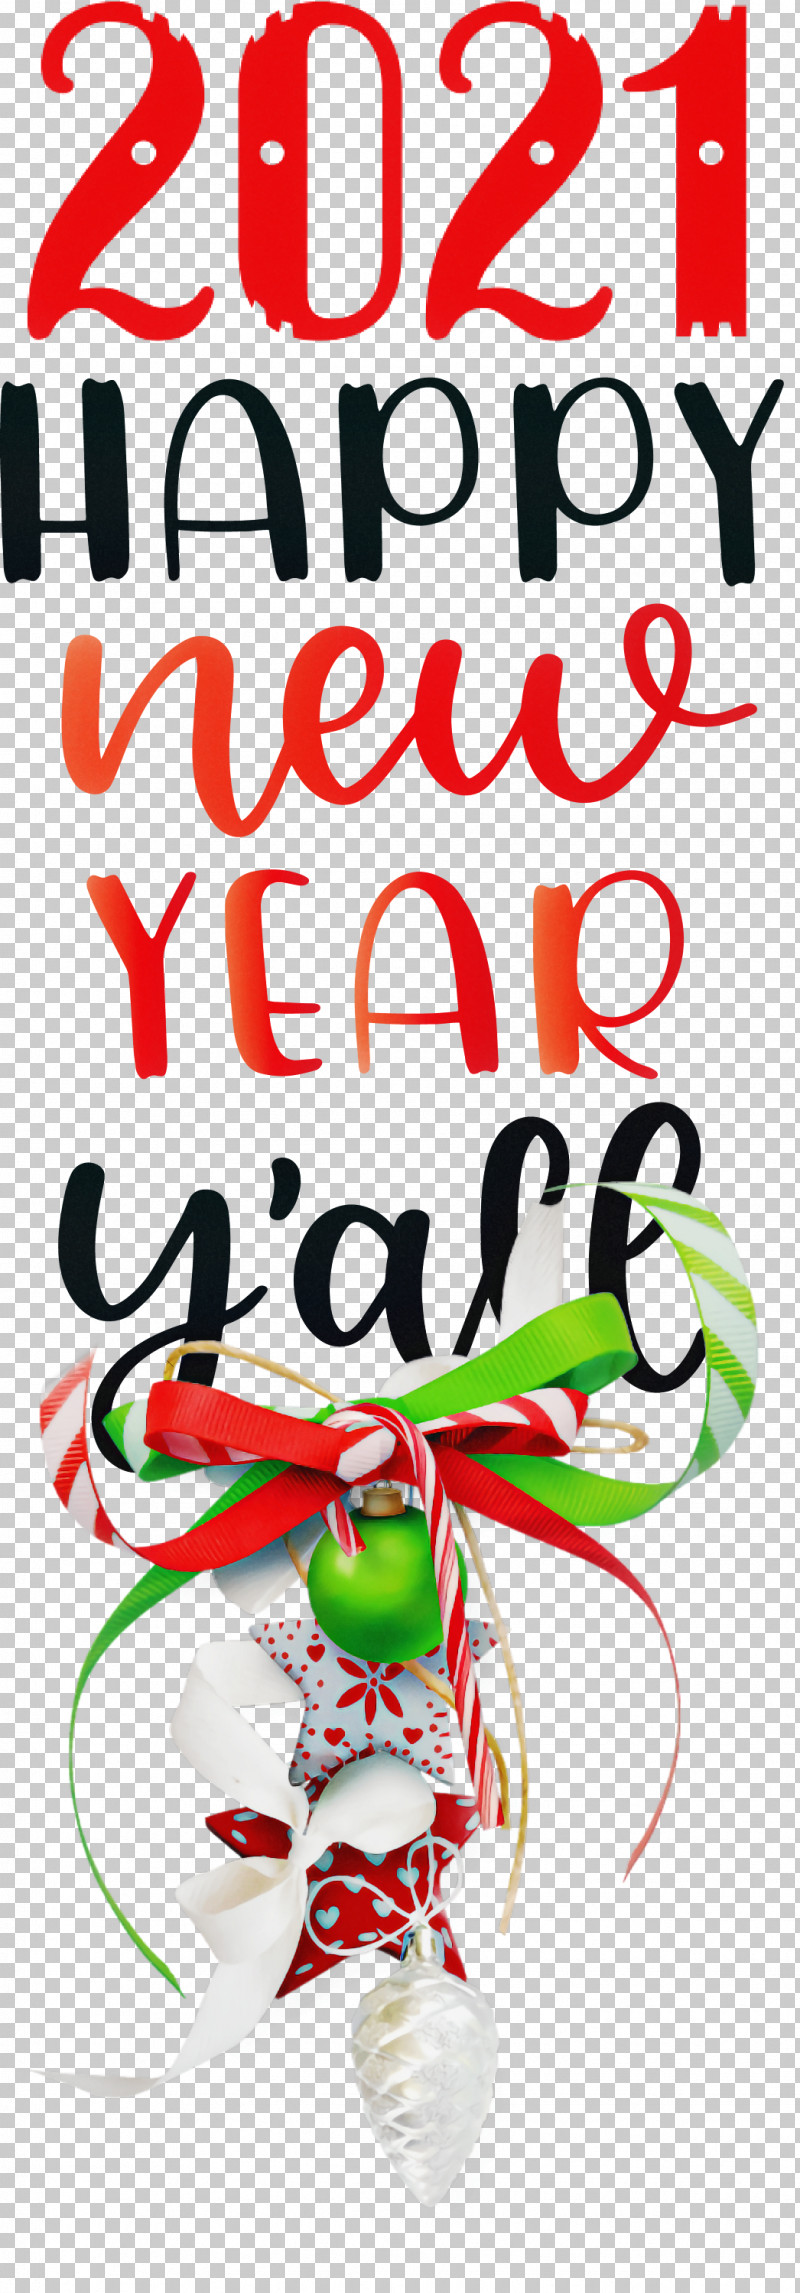 2021 Happy New Year 2021 New Year 2021 Wishes PNG, Clipart, 2021 Happy New Year, 2021 New Year, 2021 Wishes, Behavior, Geometry Free PNG Download